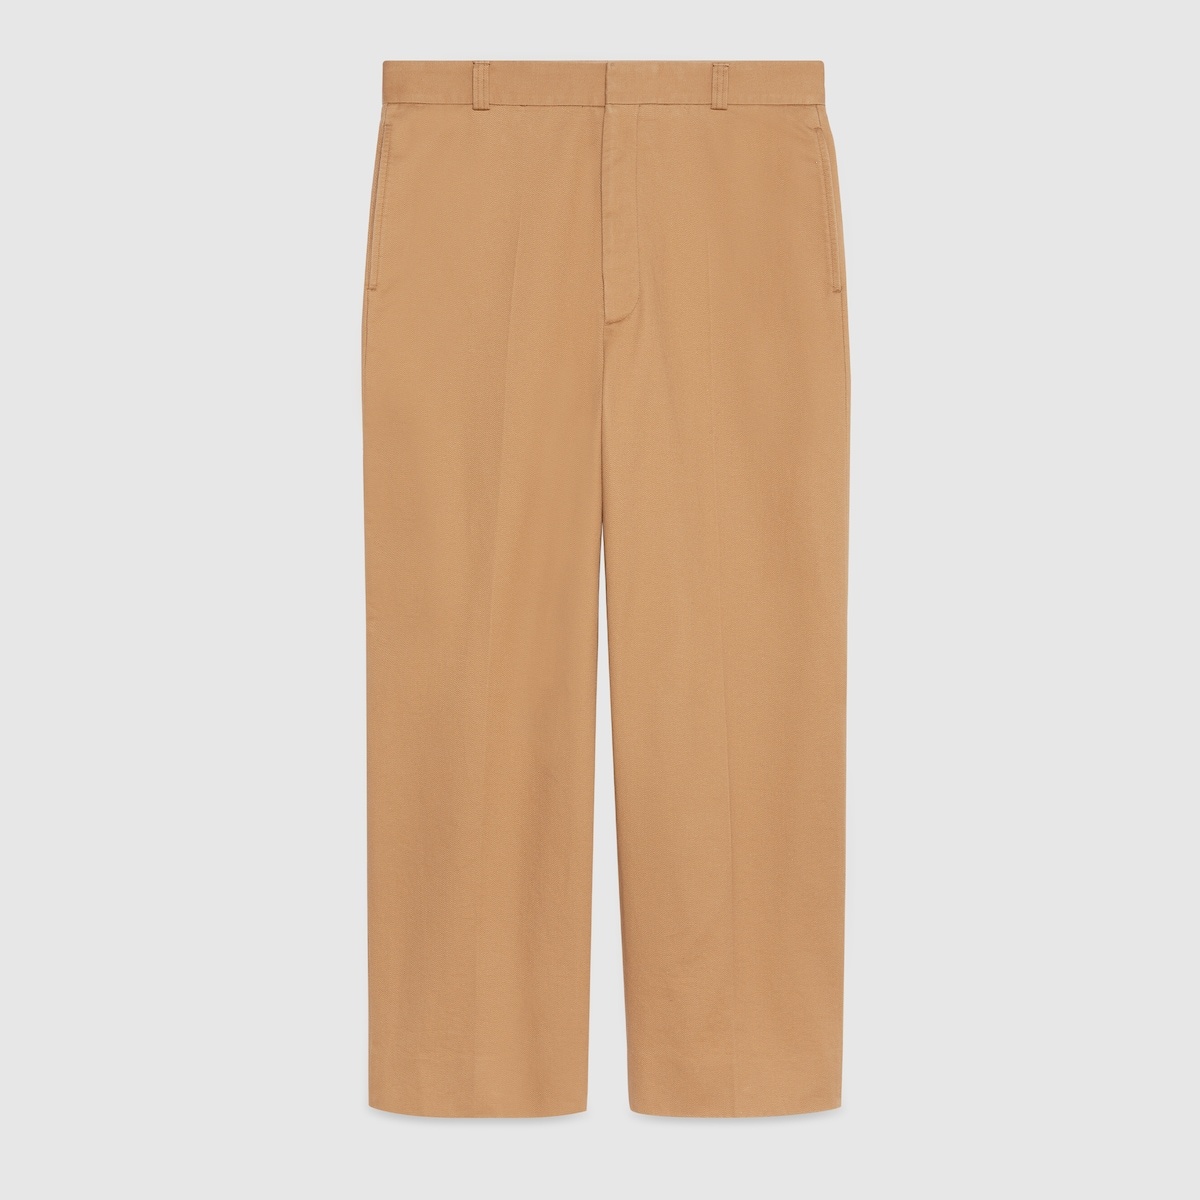 Cotton drill pant - 1